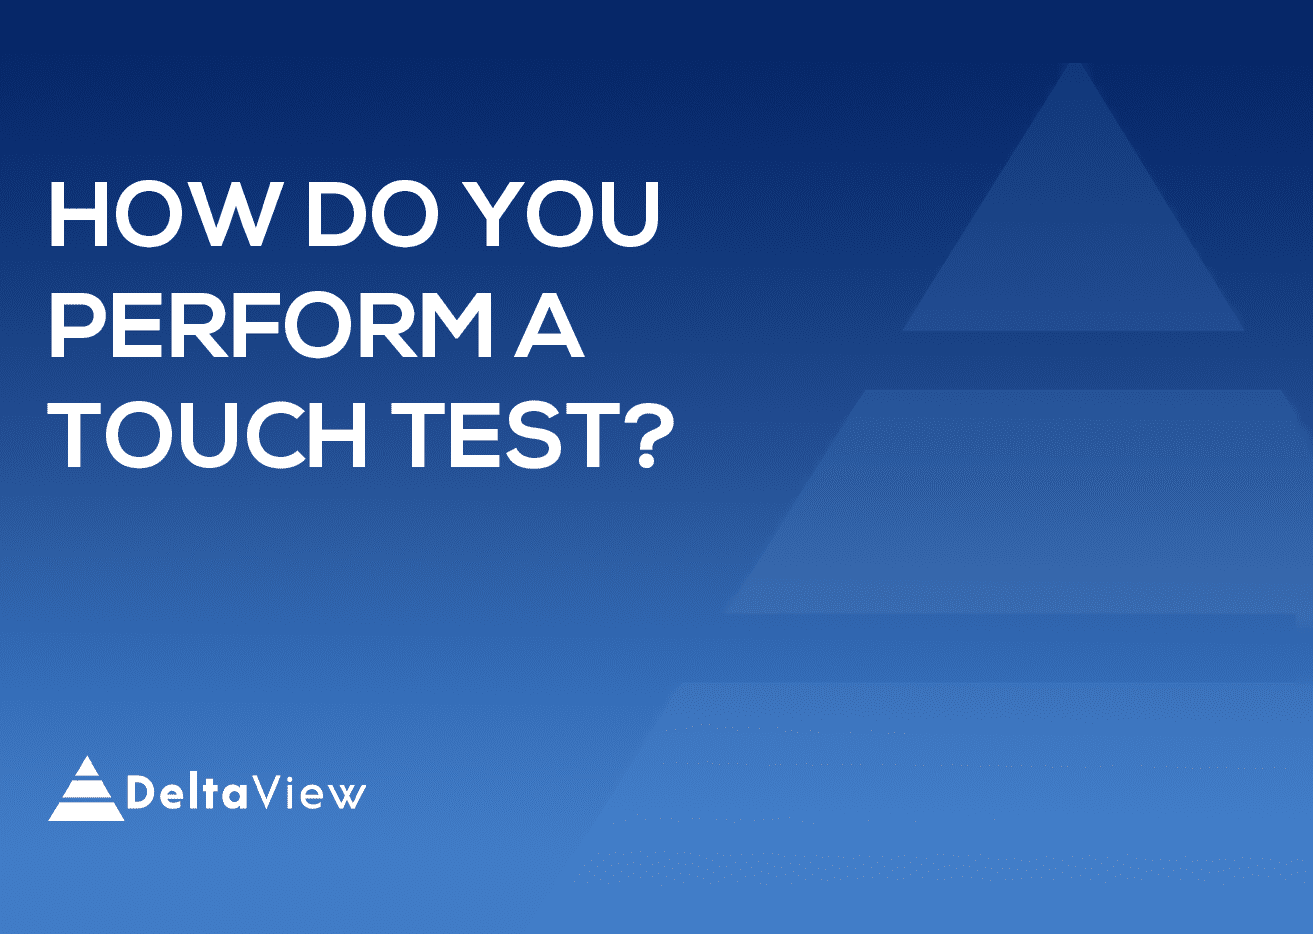 How do you perform a touch test?